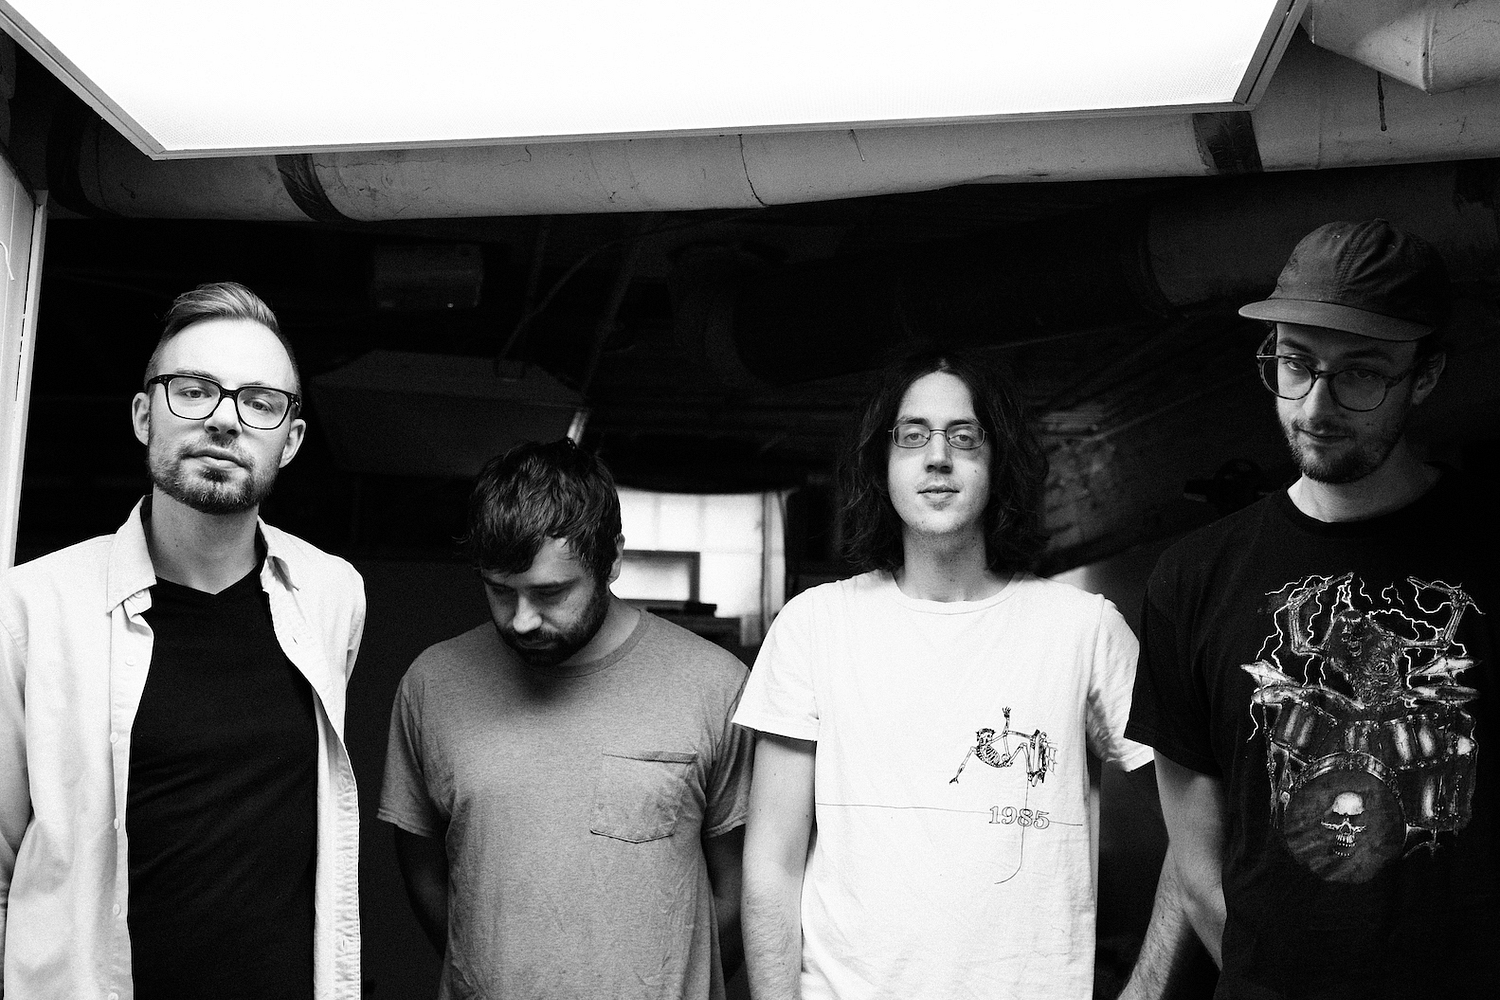 Cloud Nothings to release new album ‘The Shadow I Remember’